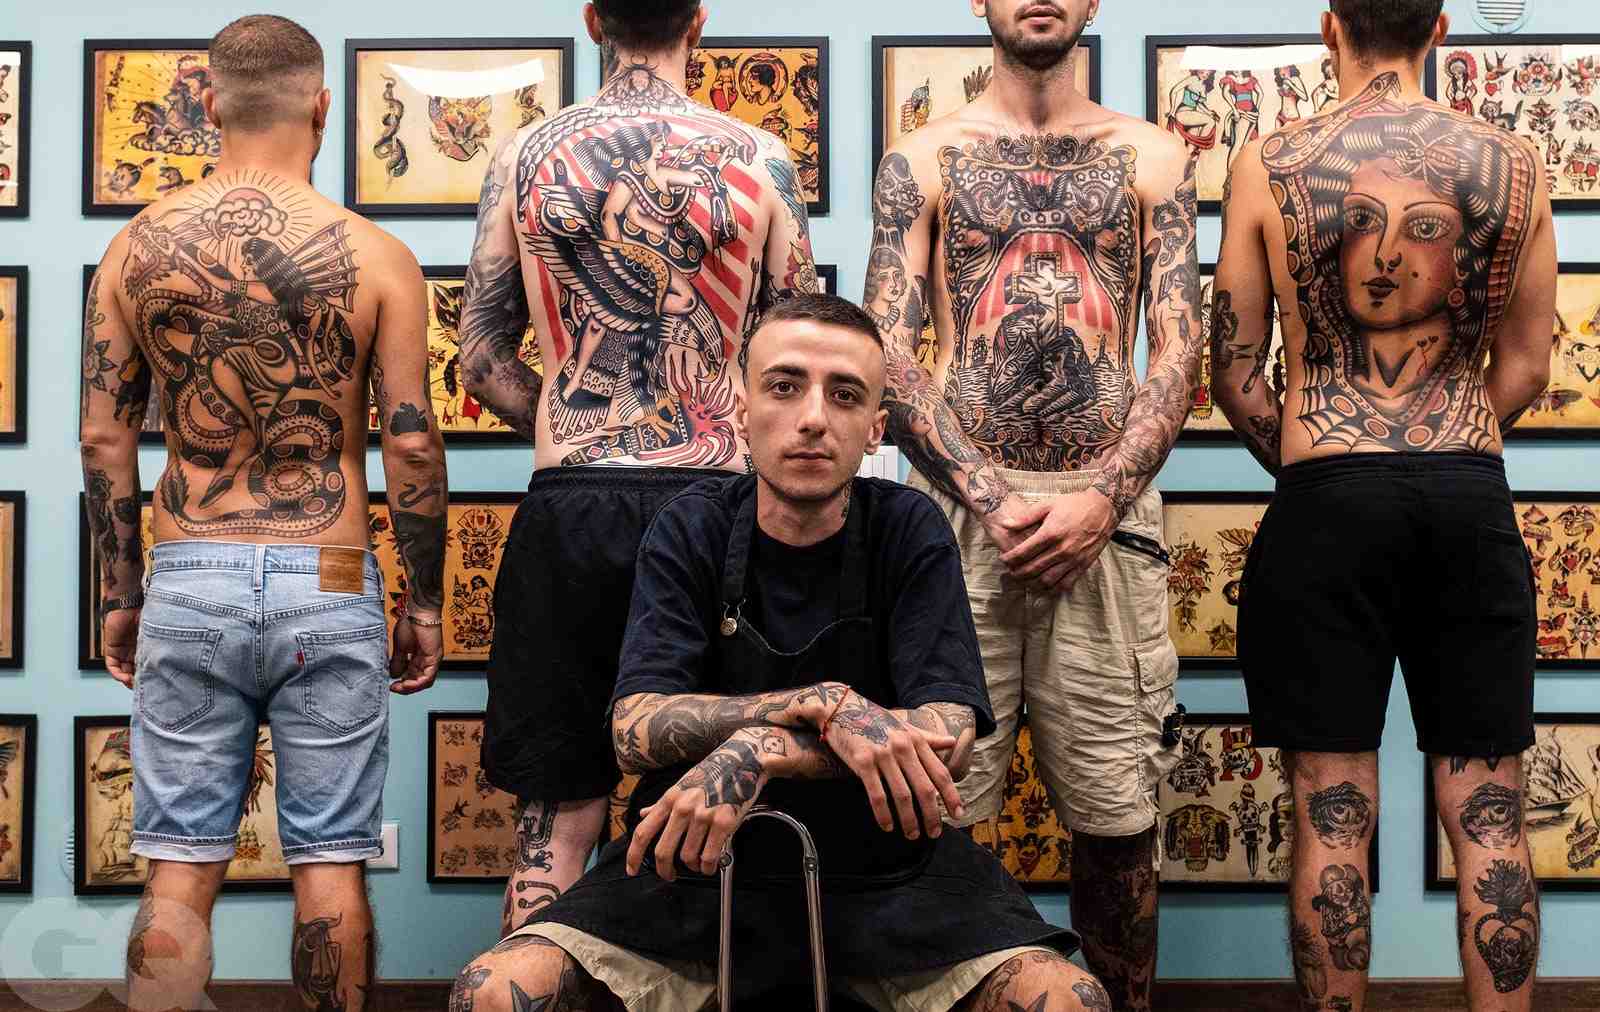 How much do you tip for a $500 tattoo?